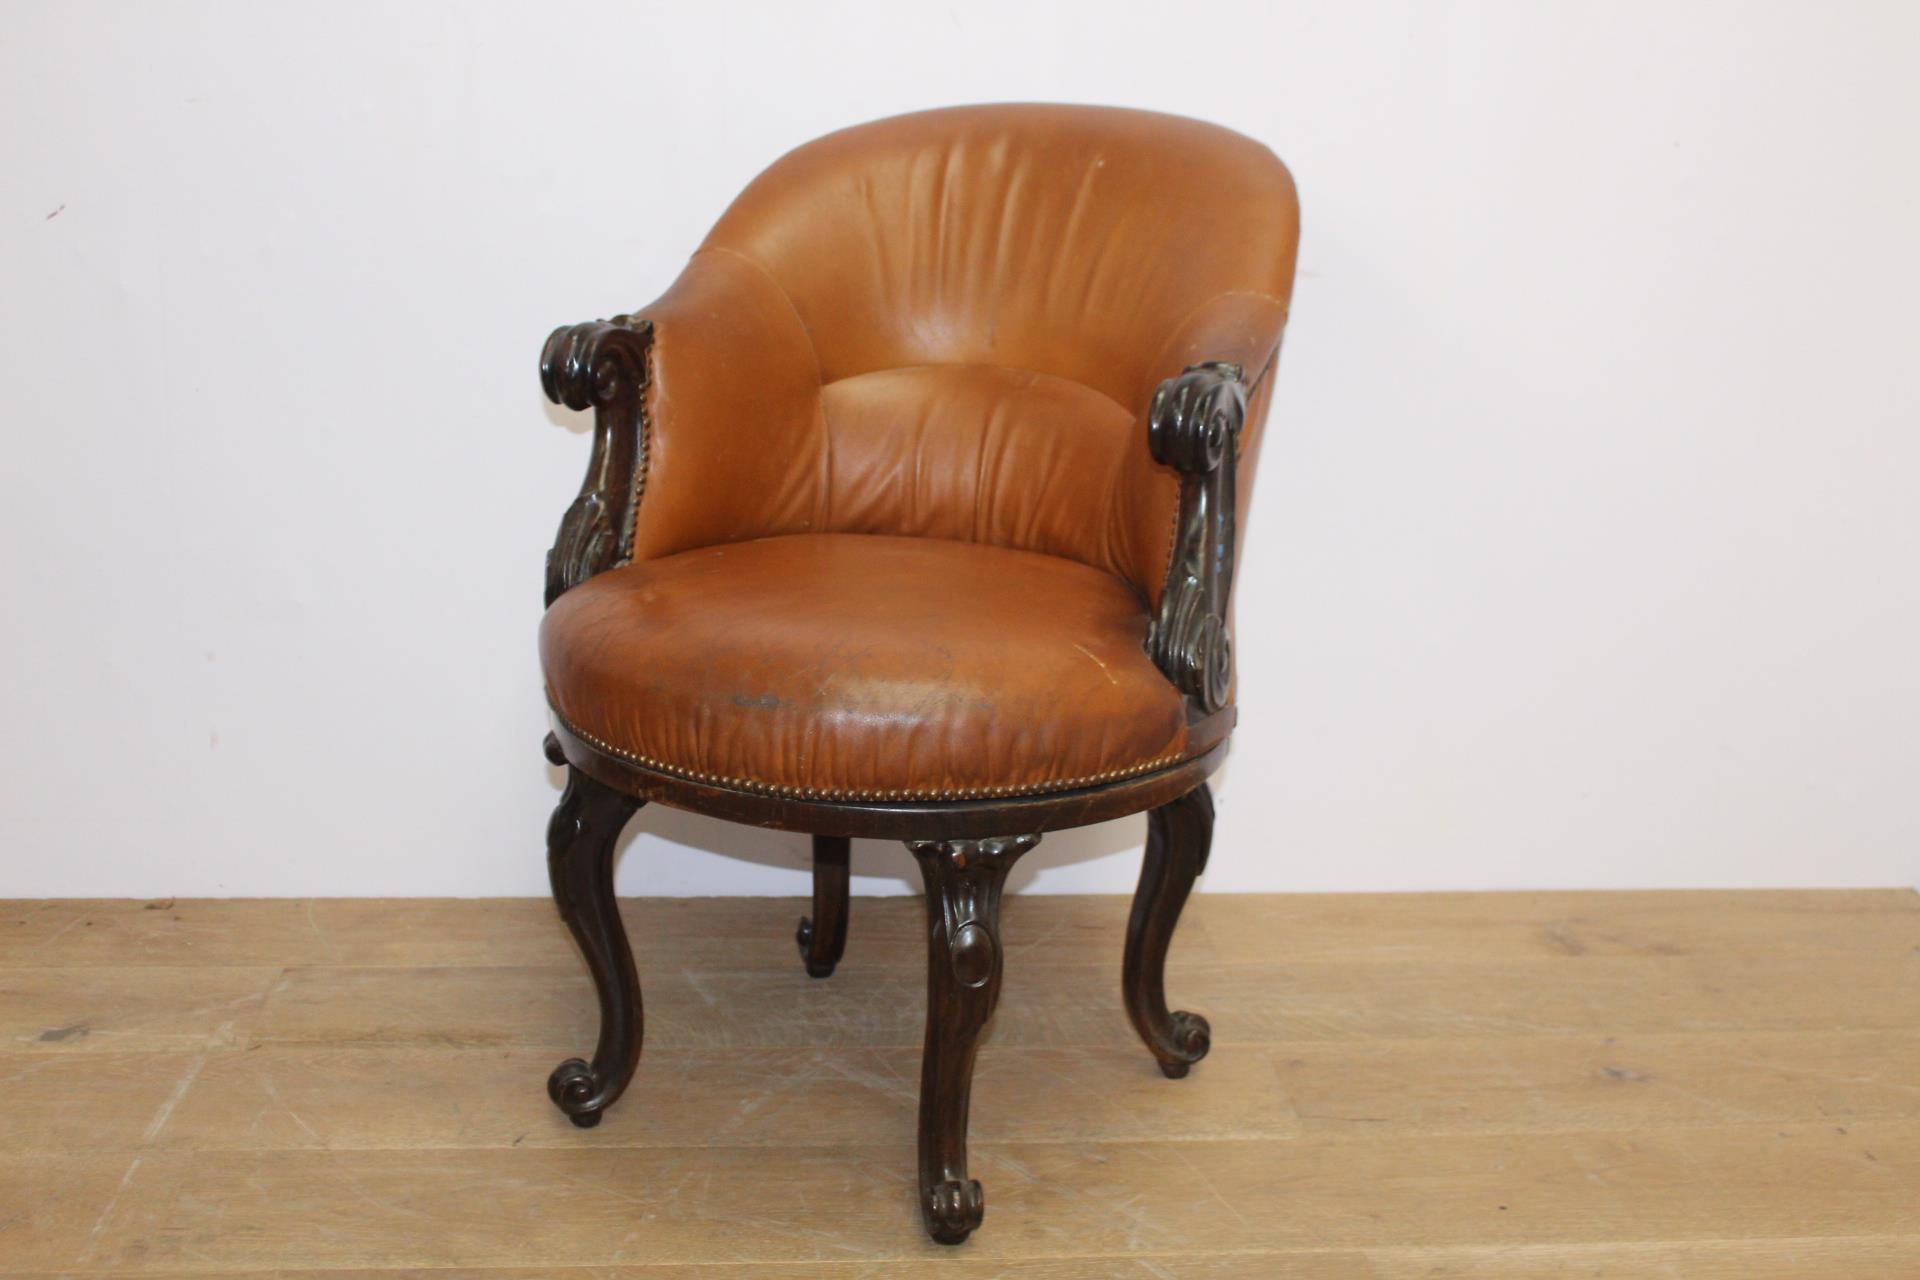 Leather upholstered mahogany swivel tub chair raised on cabriole legs {H 86cm x W 56cm x D 77cm }. - Image 3 of 3